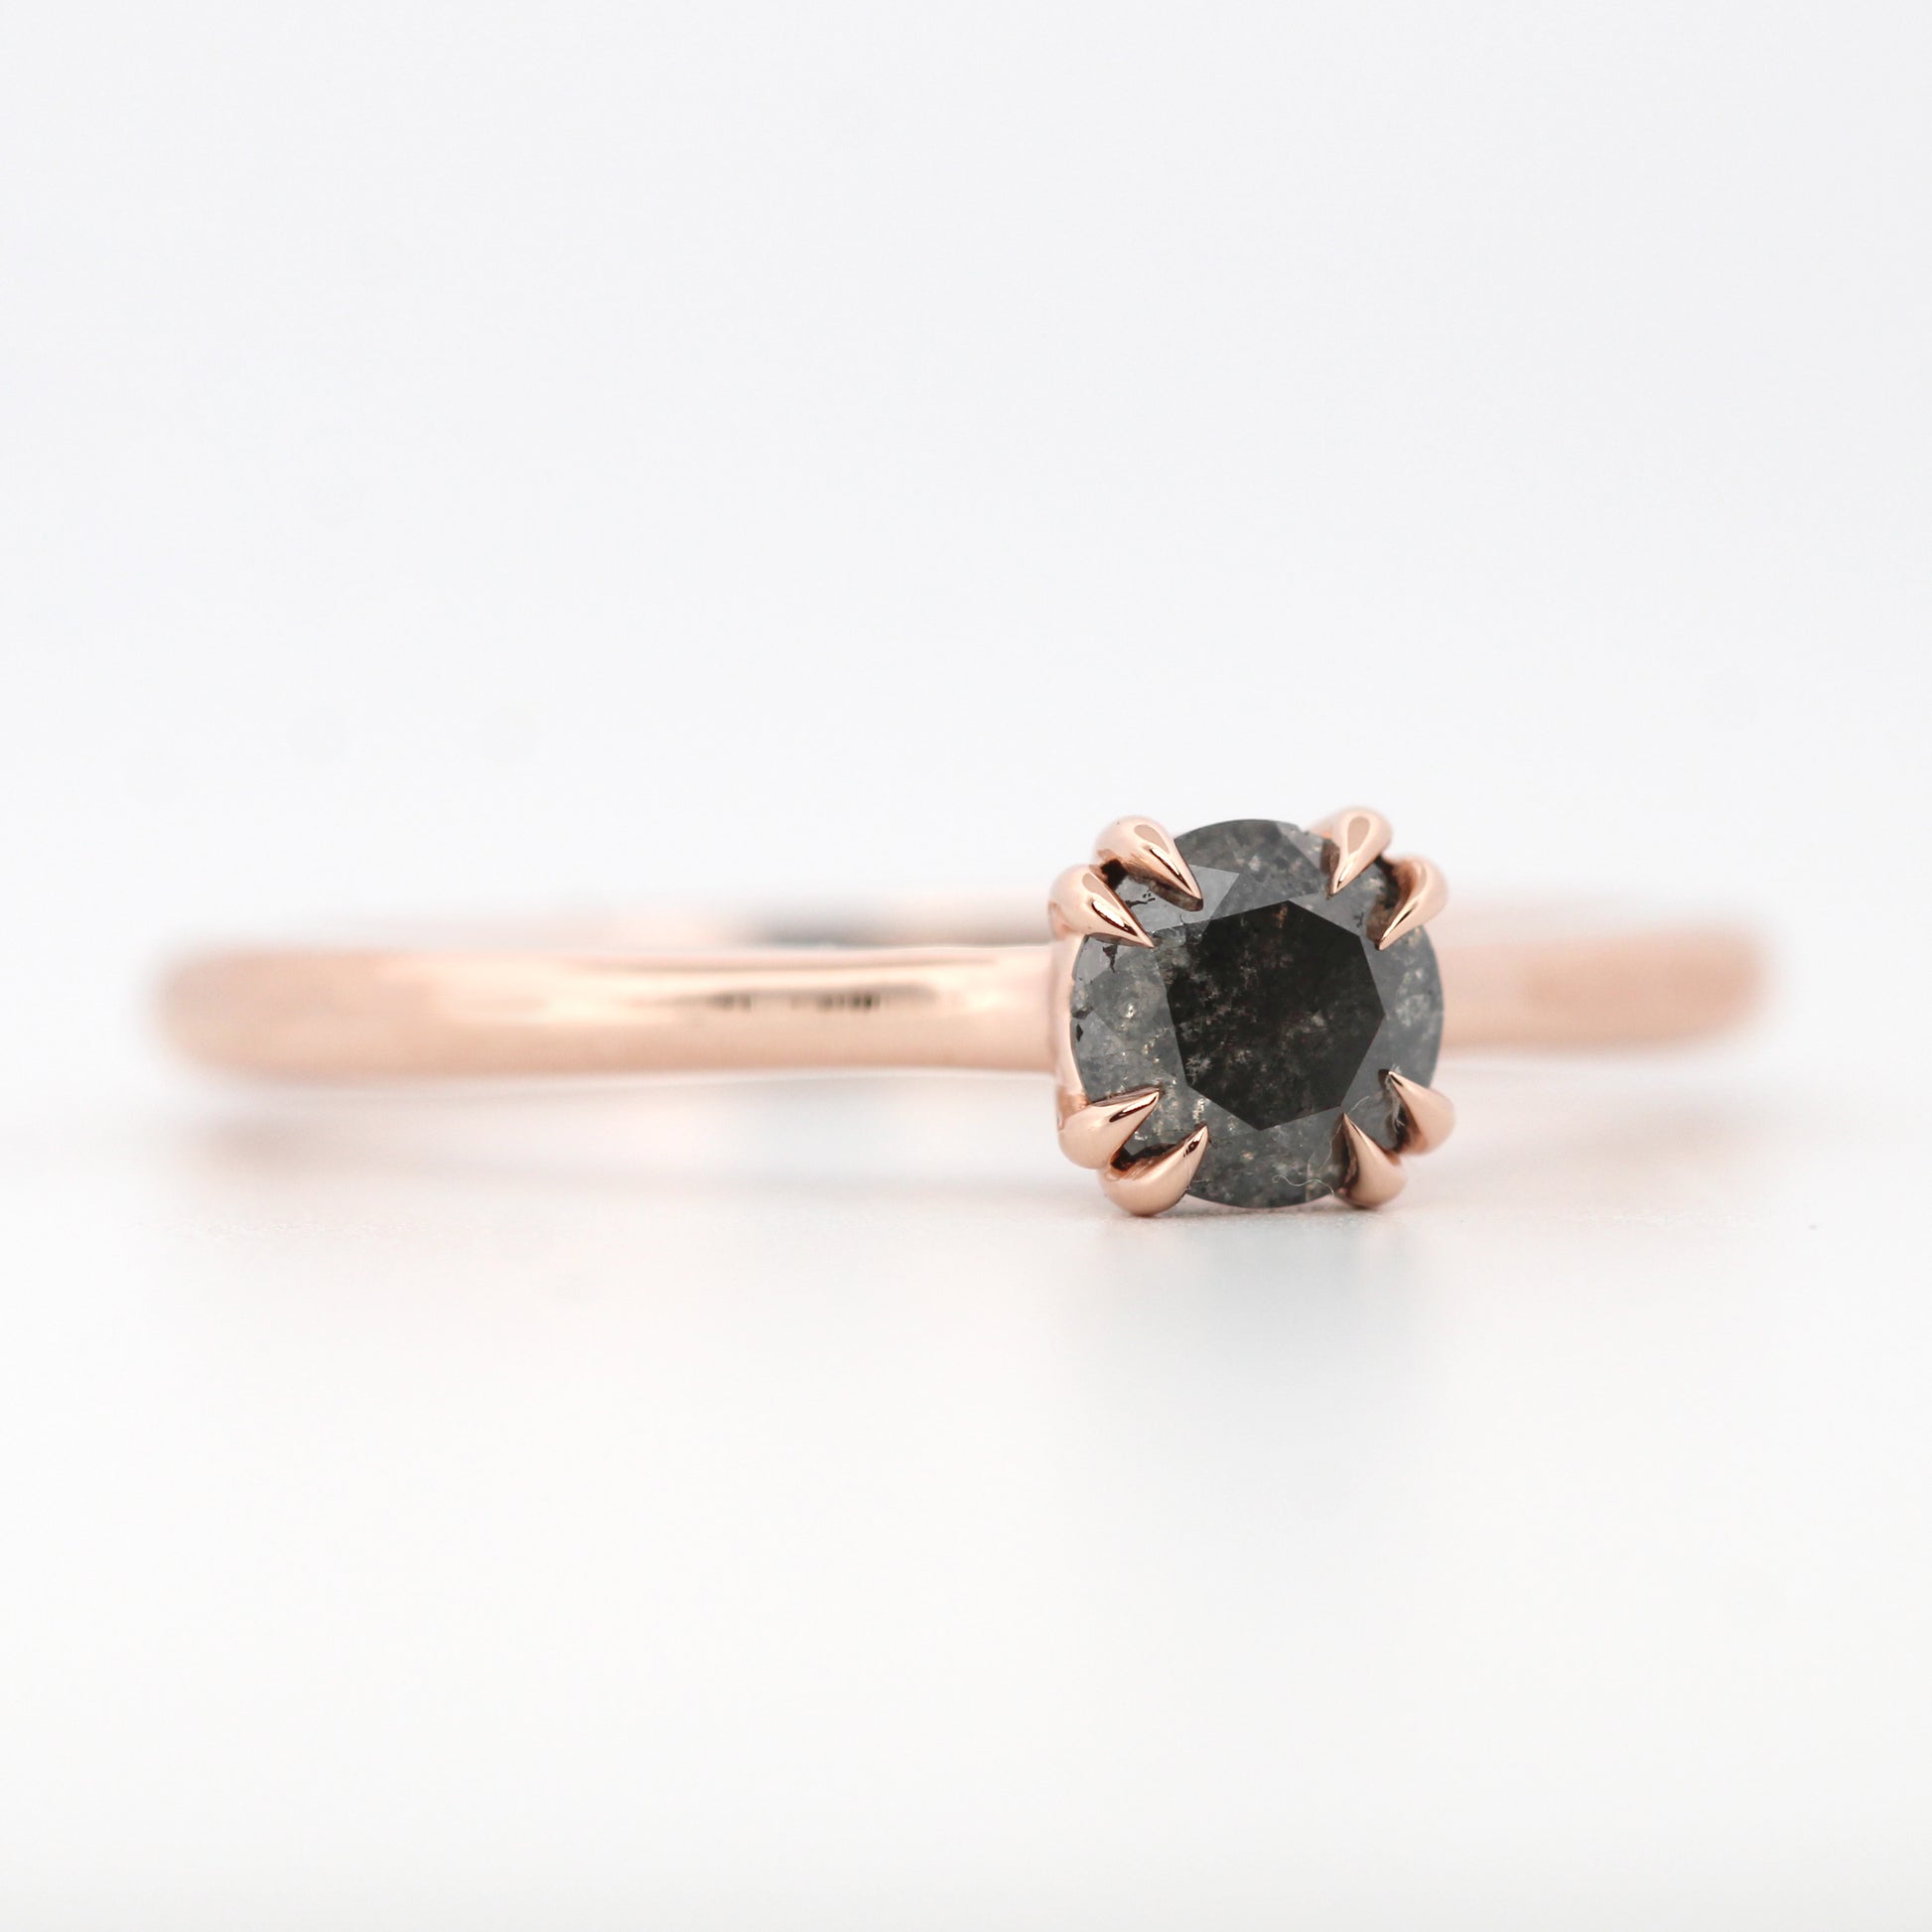 Nesta Ring with a 0.45 Carat Round Black Celestial Diamond in 14k Rose Gold - Ready to Size and Ship - Midwinter Co. Alternative Bridal Rings and Modern Fine Jewelry